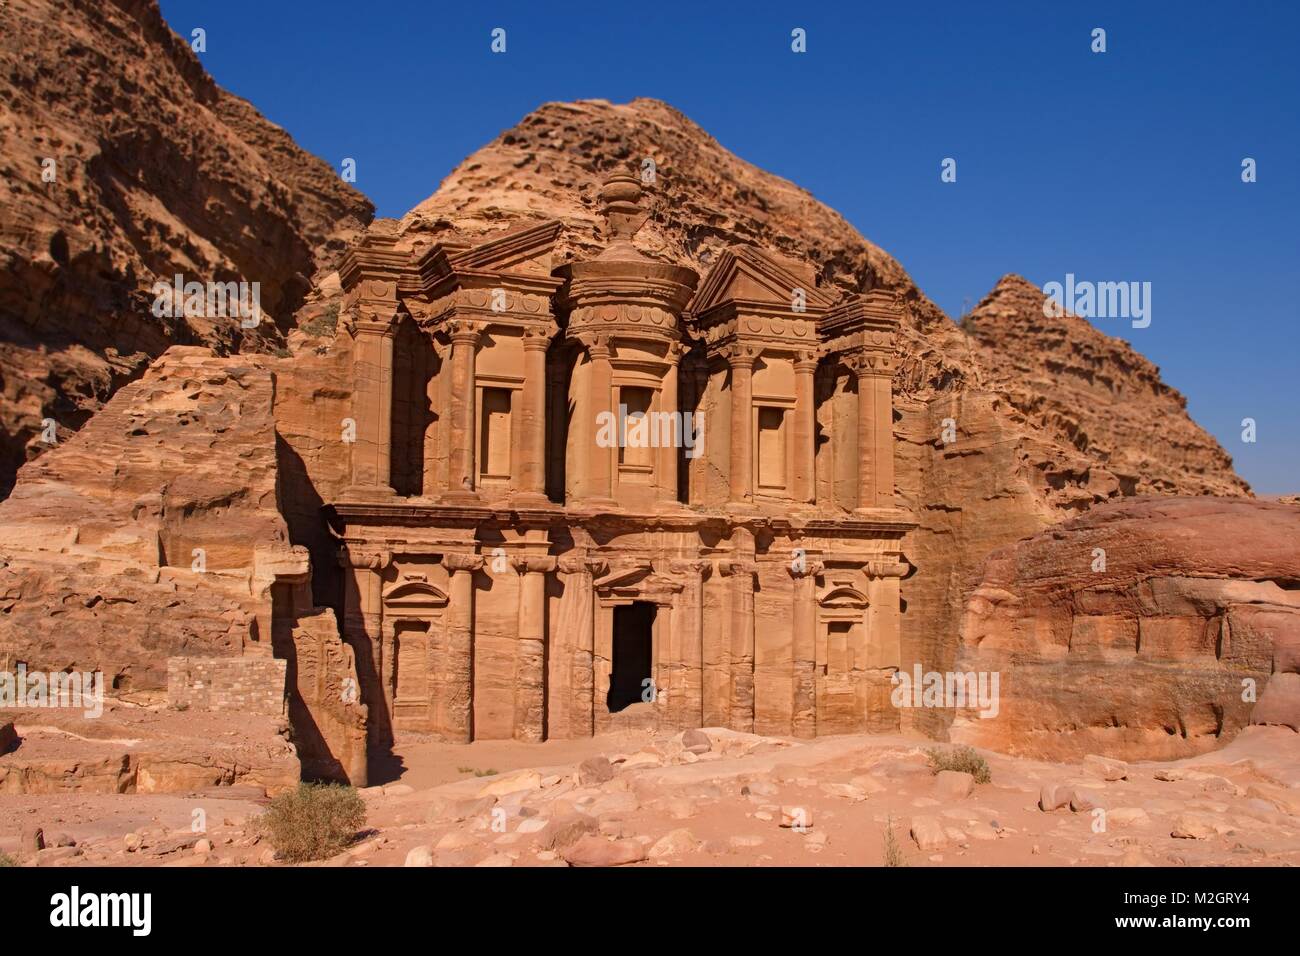 El Deir or The Monastery at Petra, Jordan. The stone city in the middle east Stock Photo